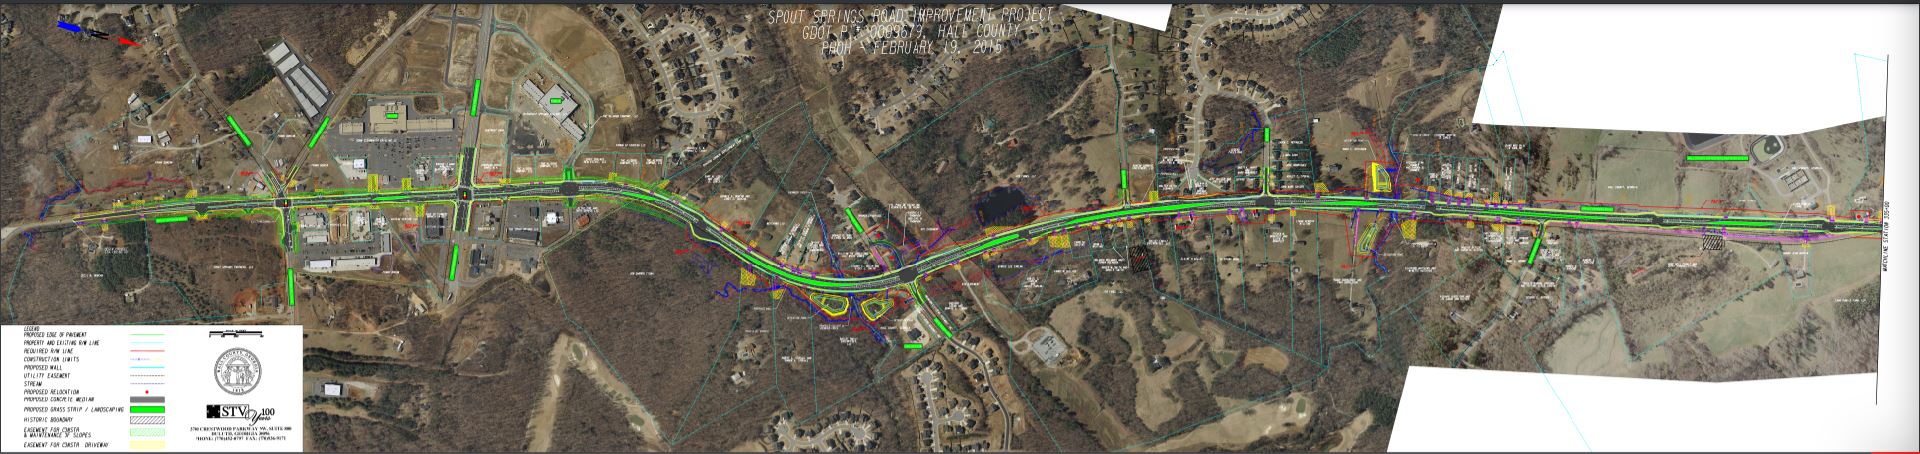 Spout Springs RD Widening Map 1